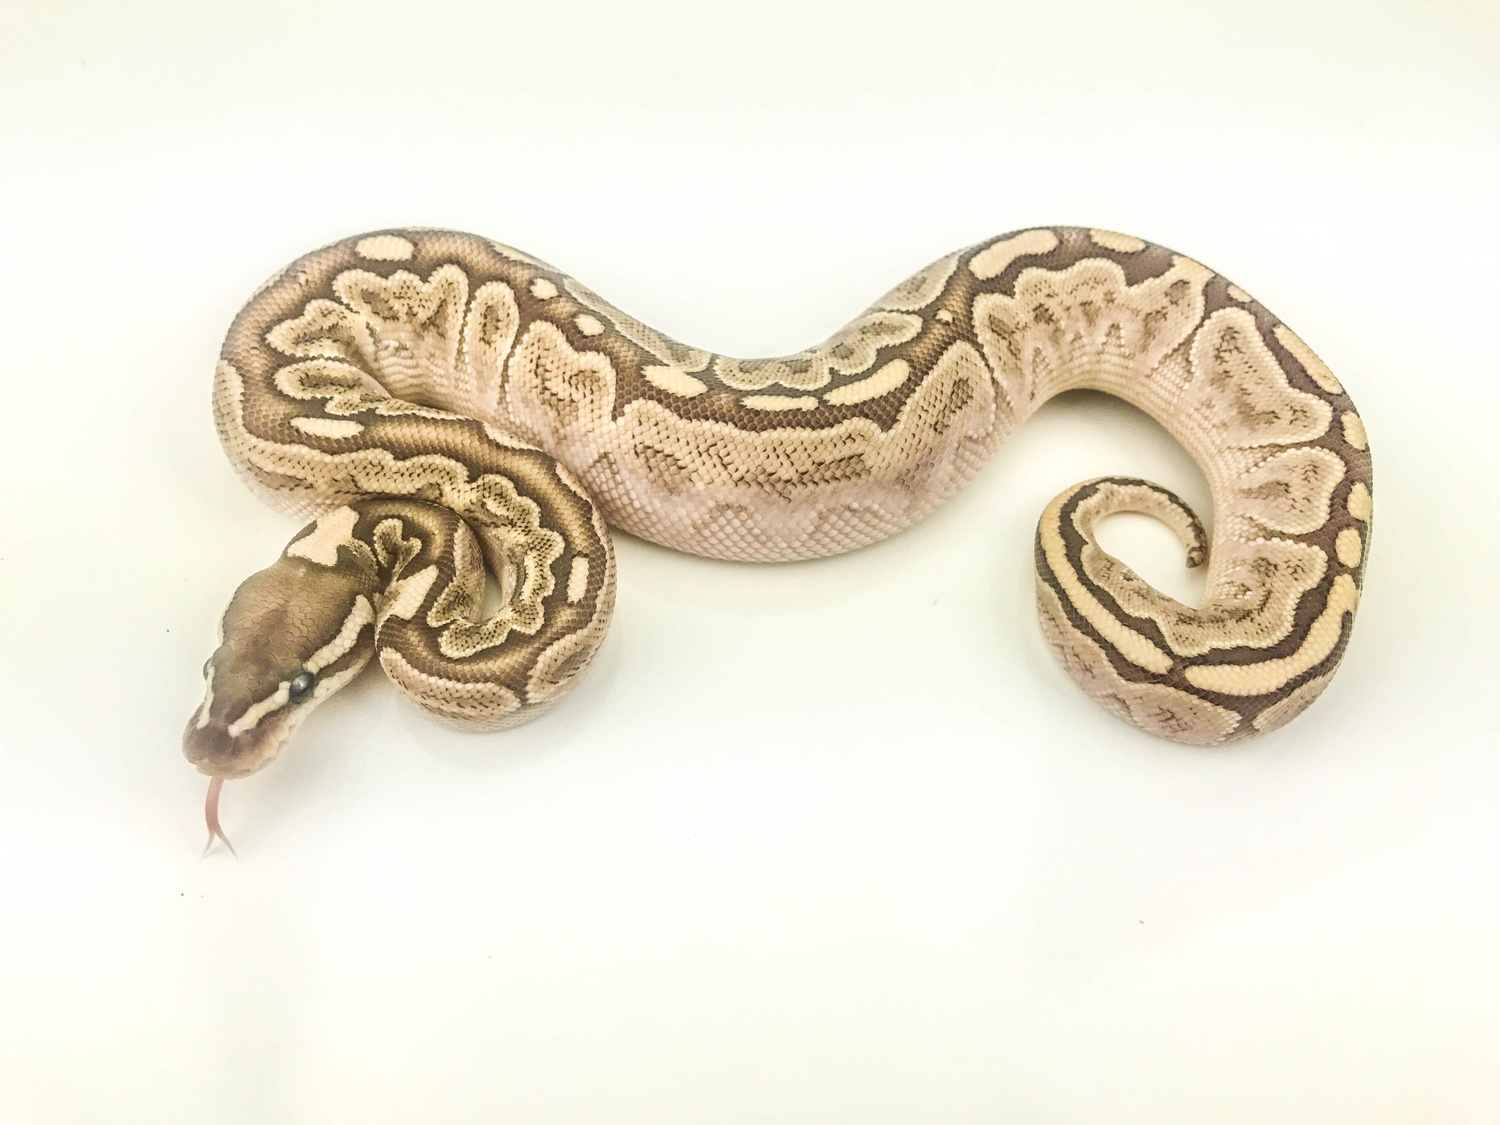 Bamboo Daddy Ball Python by On the Ball Pythons